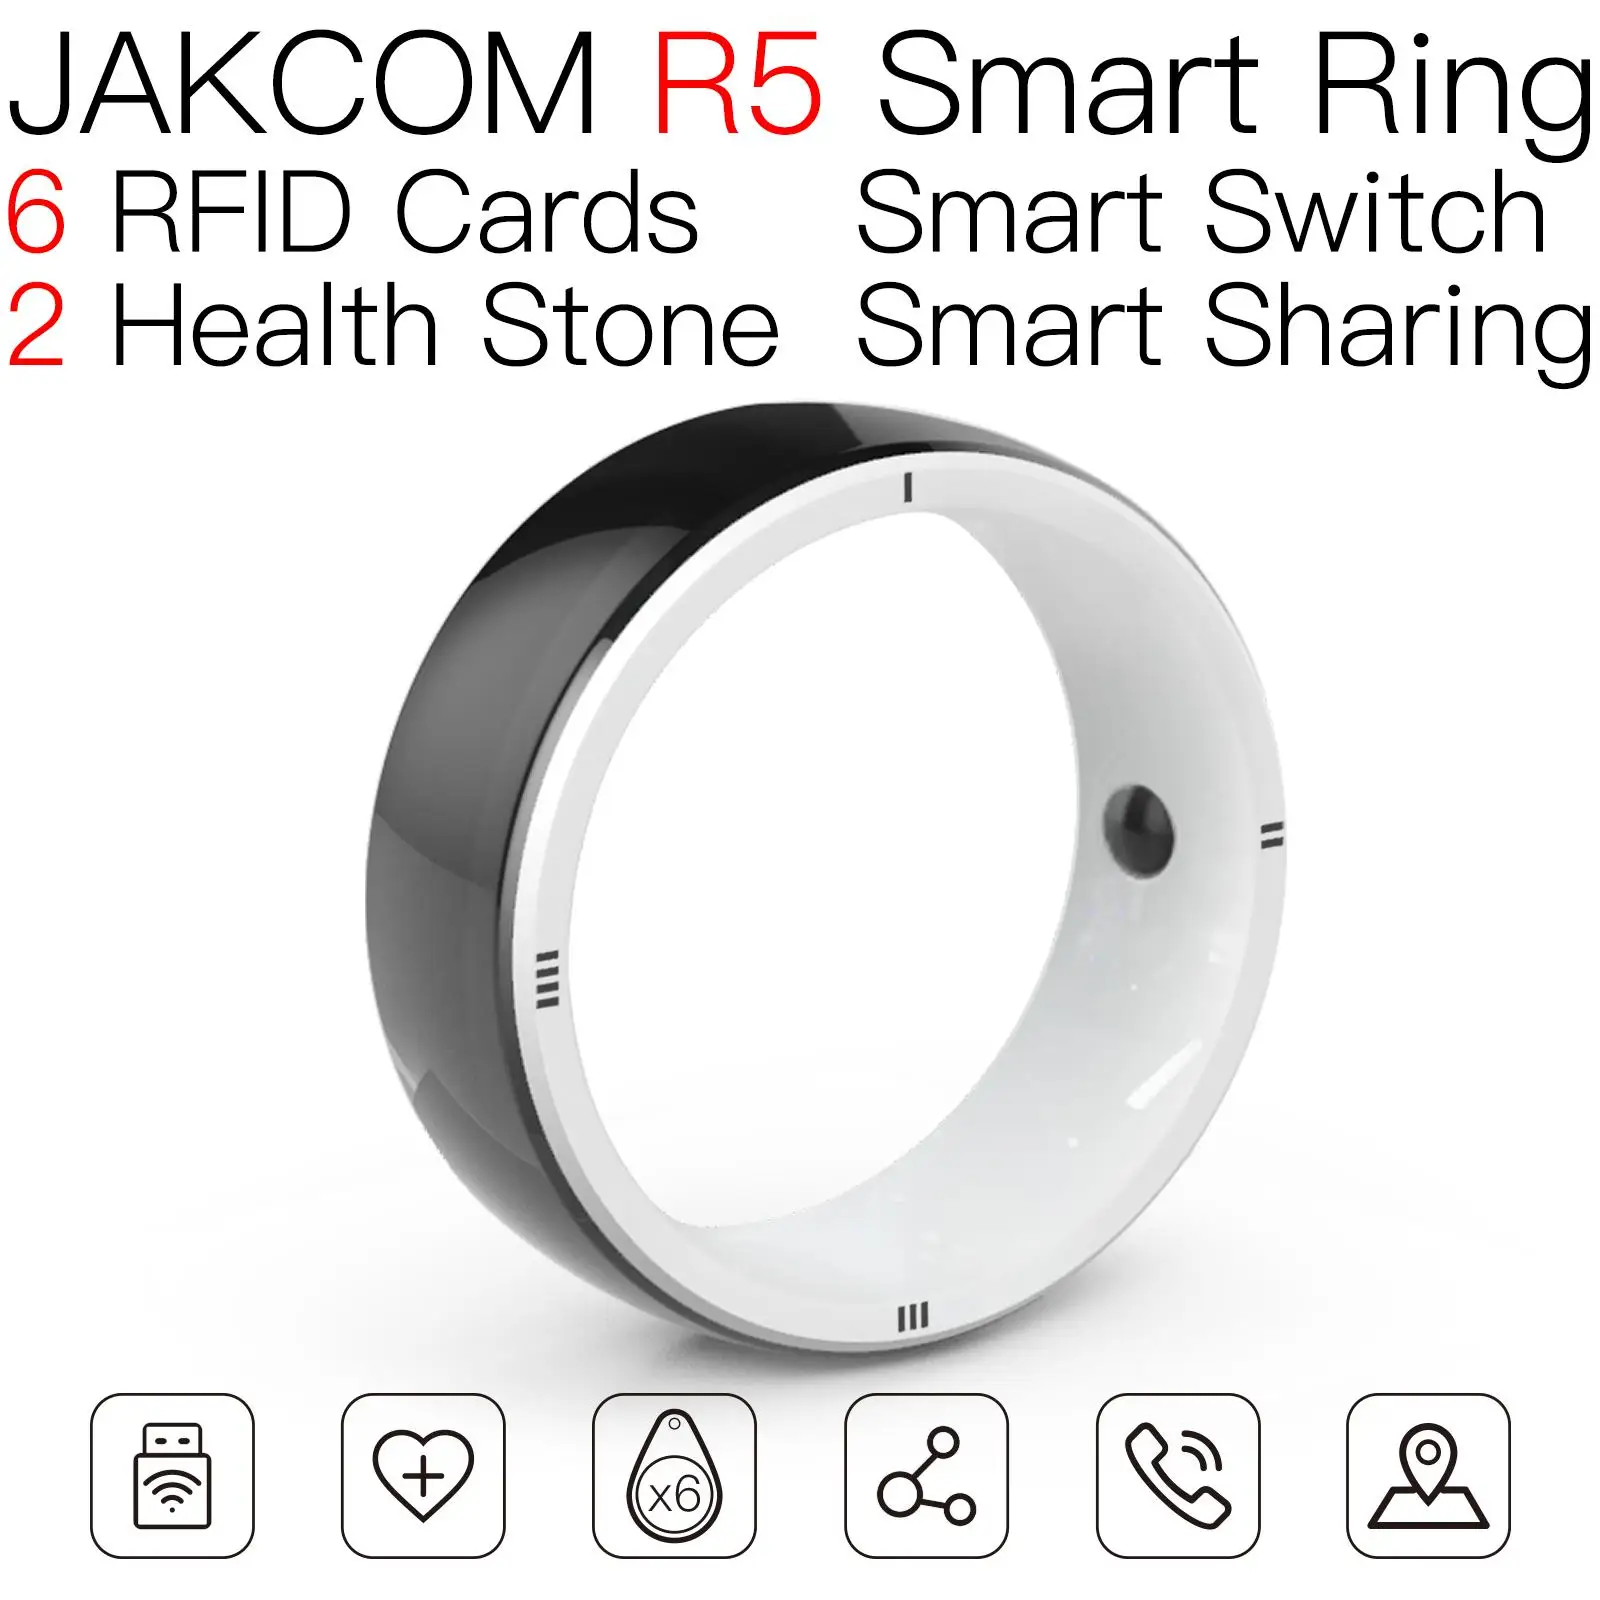 

JAKCOM R5 R4 Smart Ring New Product of Consumer electronics smart wearable device Watch Smartphone magic ring